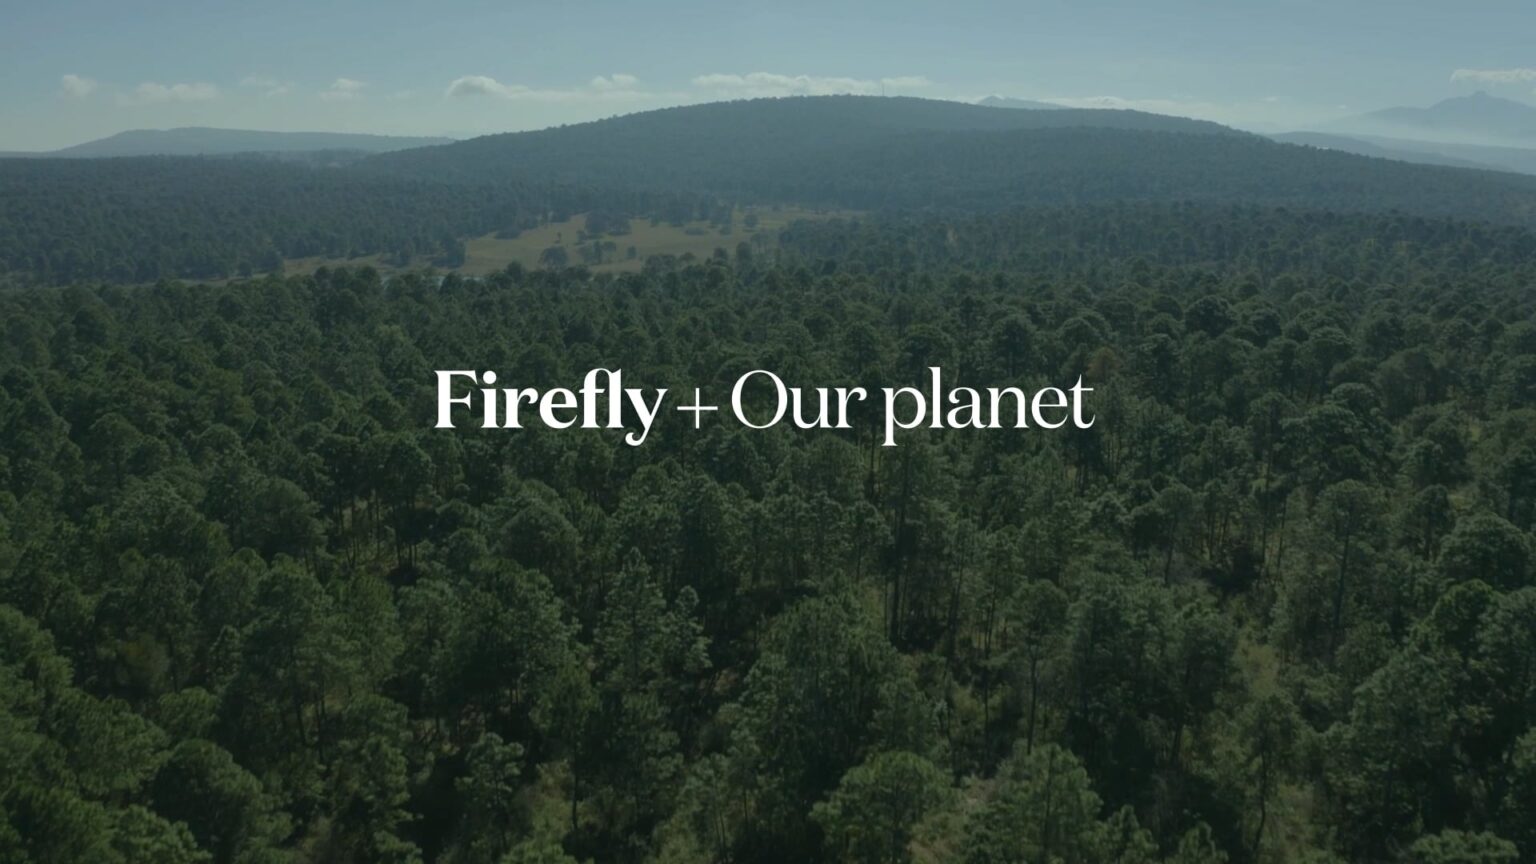 The words "Firefly + Our Planet" on a photograph of a lush forest.